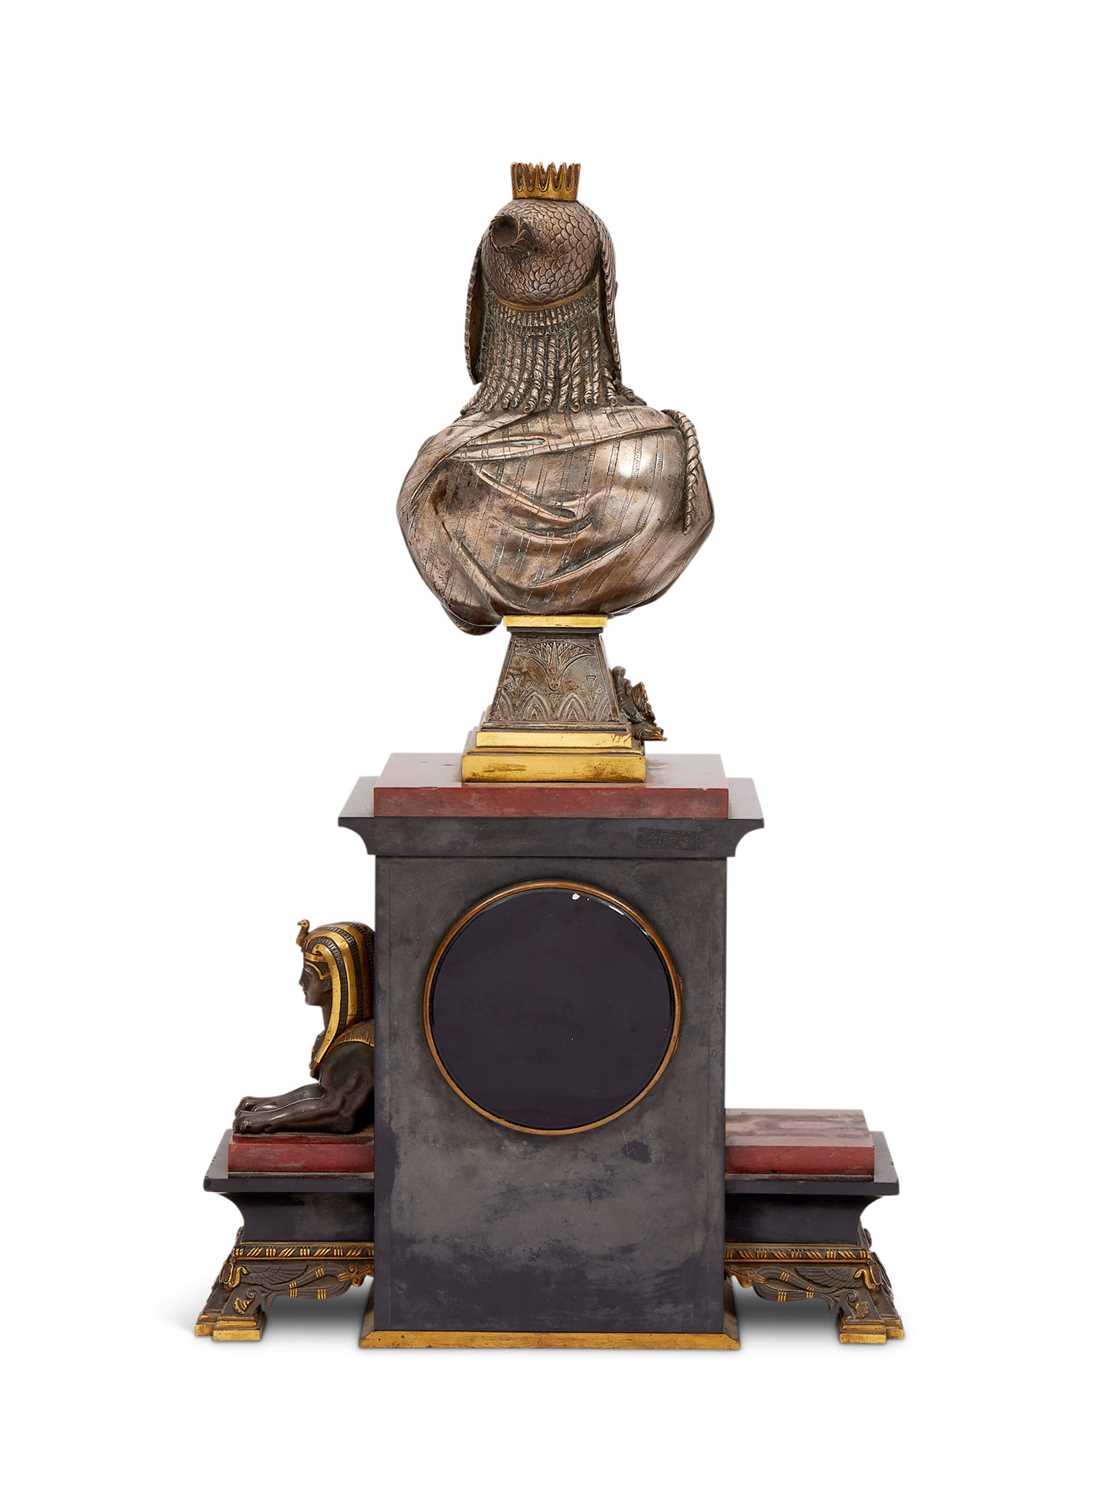 A LATE 19TH CENTURY EGYPTIAN REVIVAL MANTEL CLOCK ATTRIBUTED TO GEORGES EMILE HENRI SERVANT - Image 2 of 3